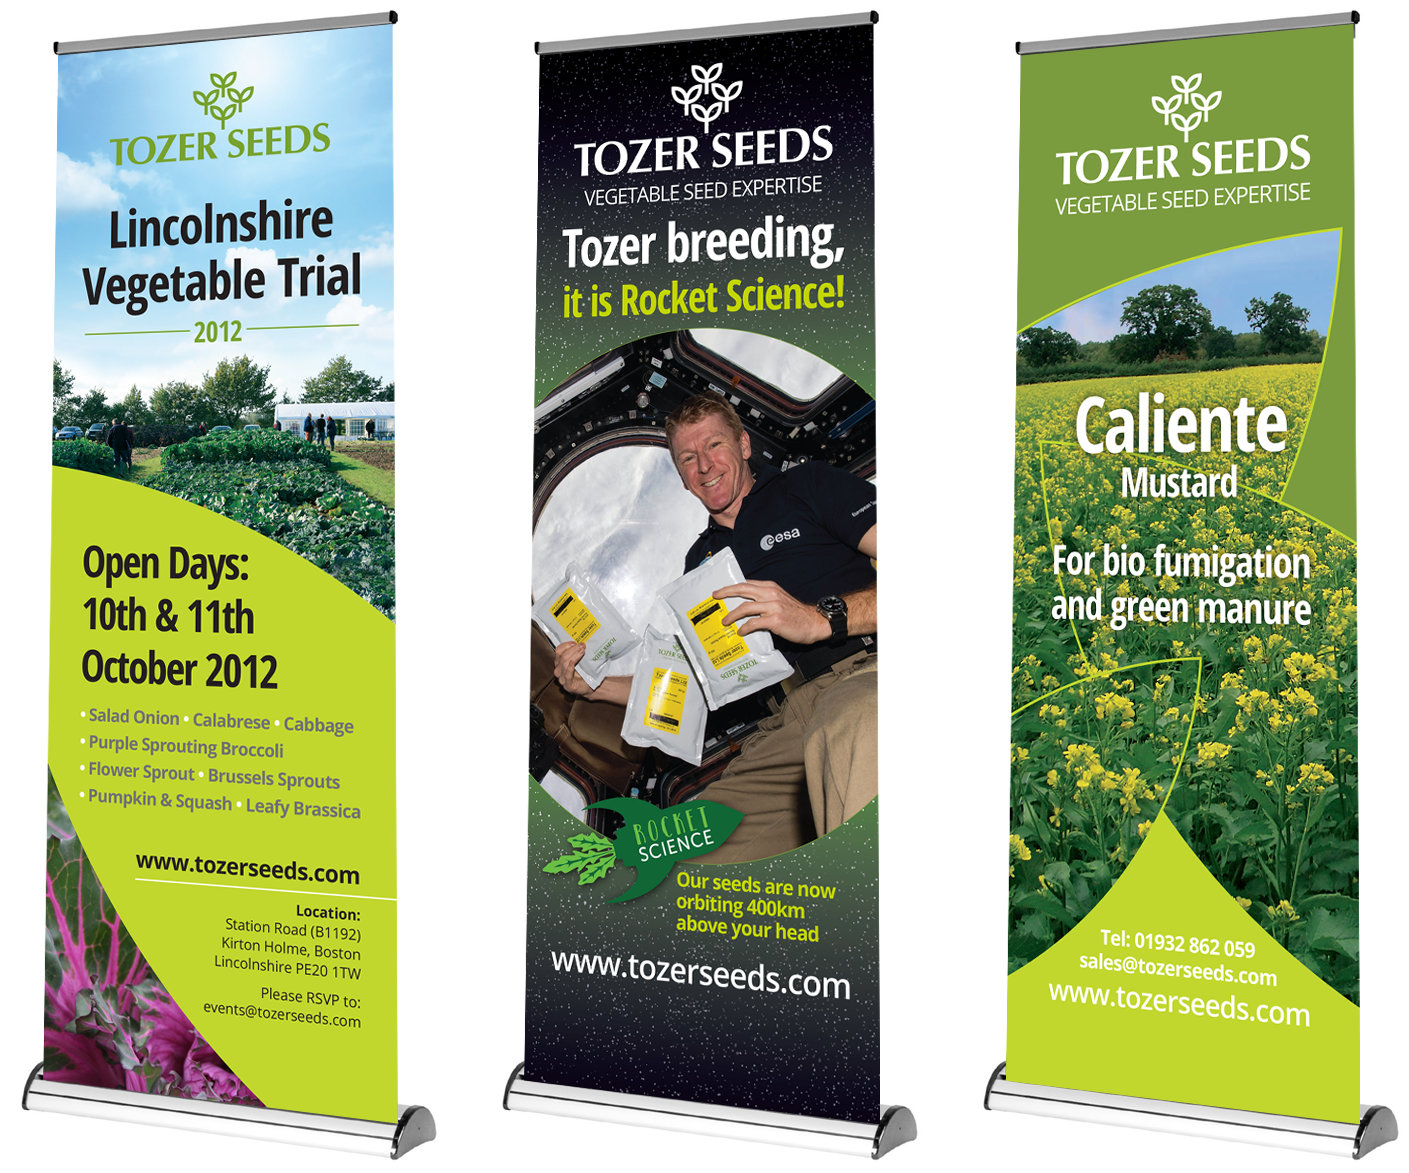 Tozer Seeds branding on exhibition stands